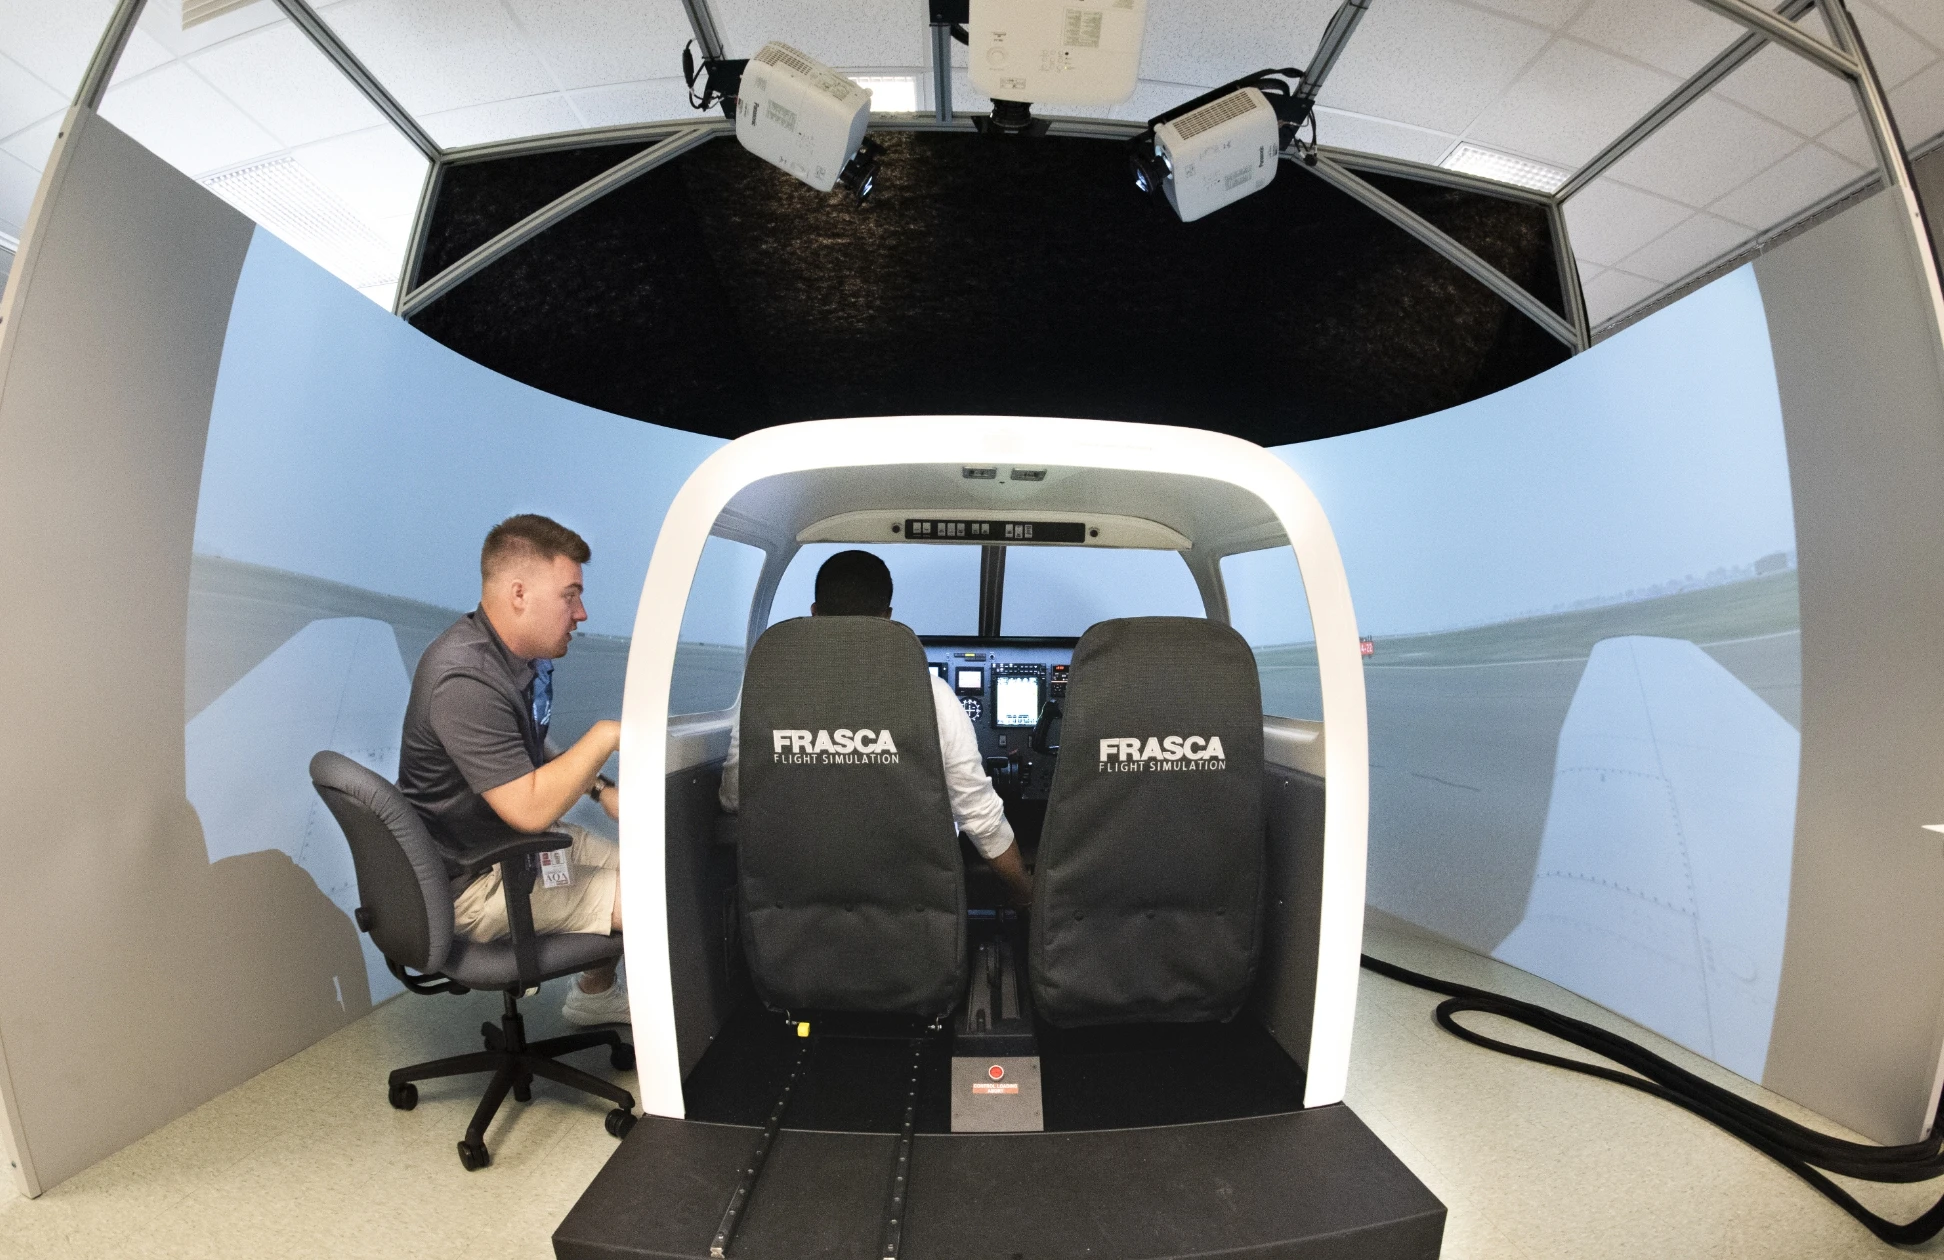 A photo of a flight simulation booth.